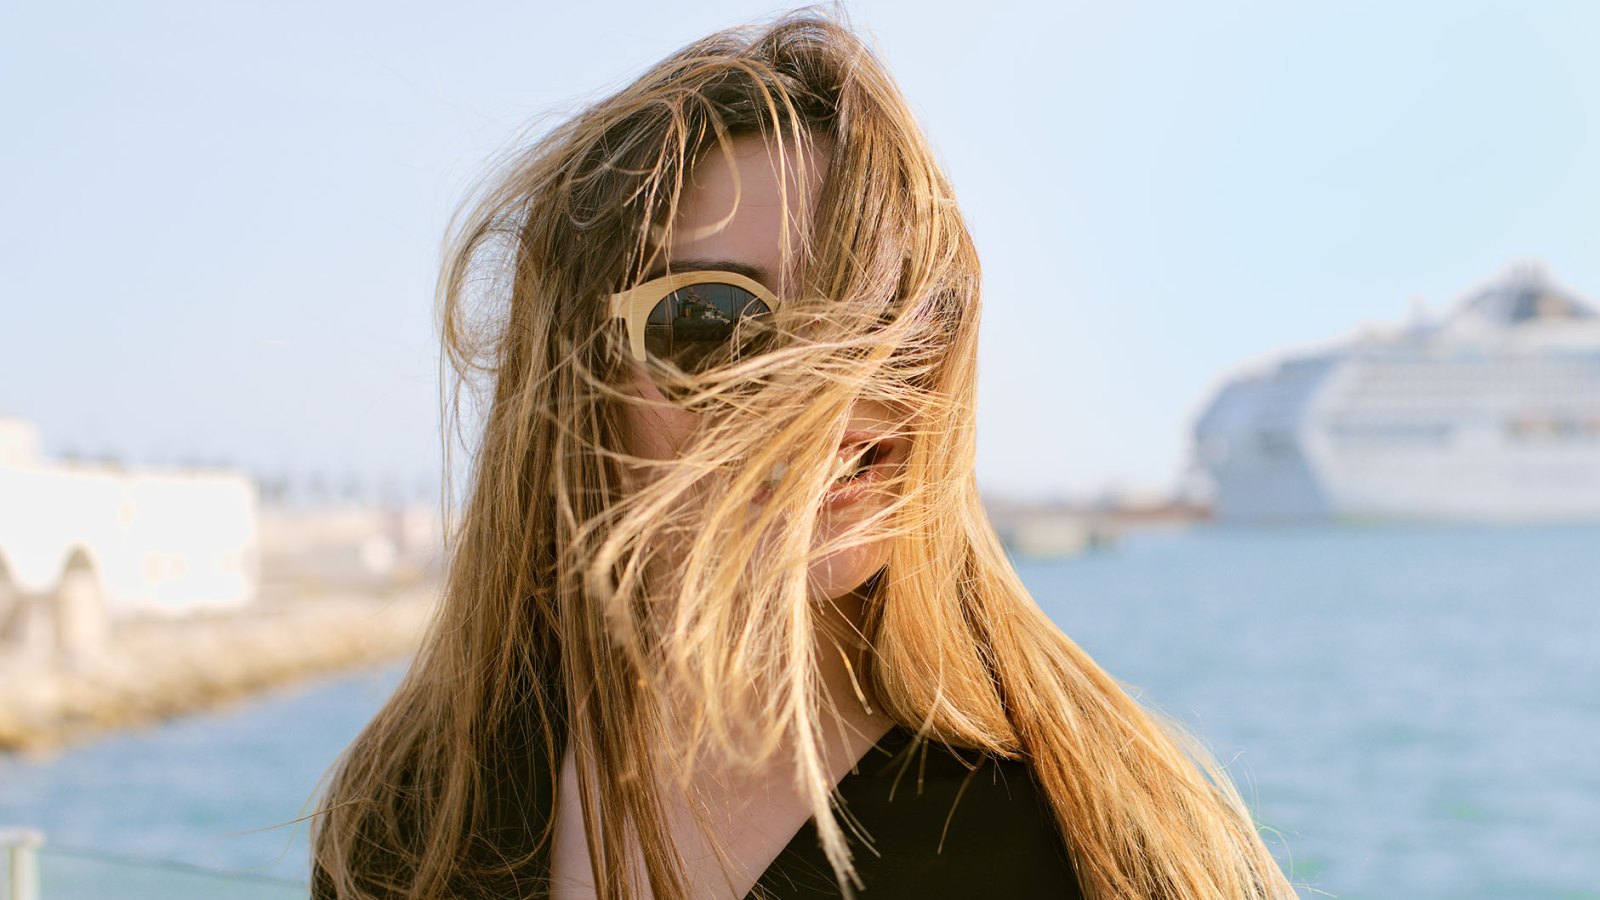 Head portrait of a beautiful young woman with her hair blown by the wind in front of the sea